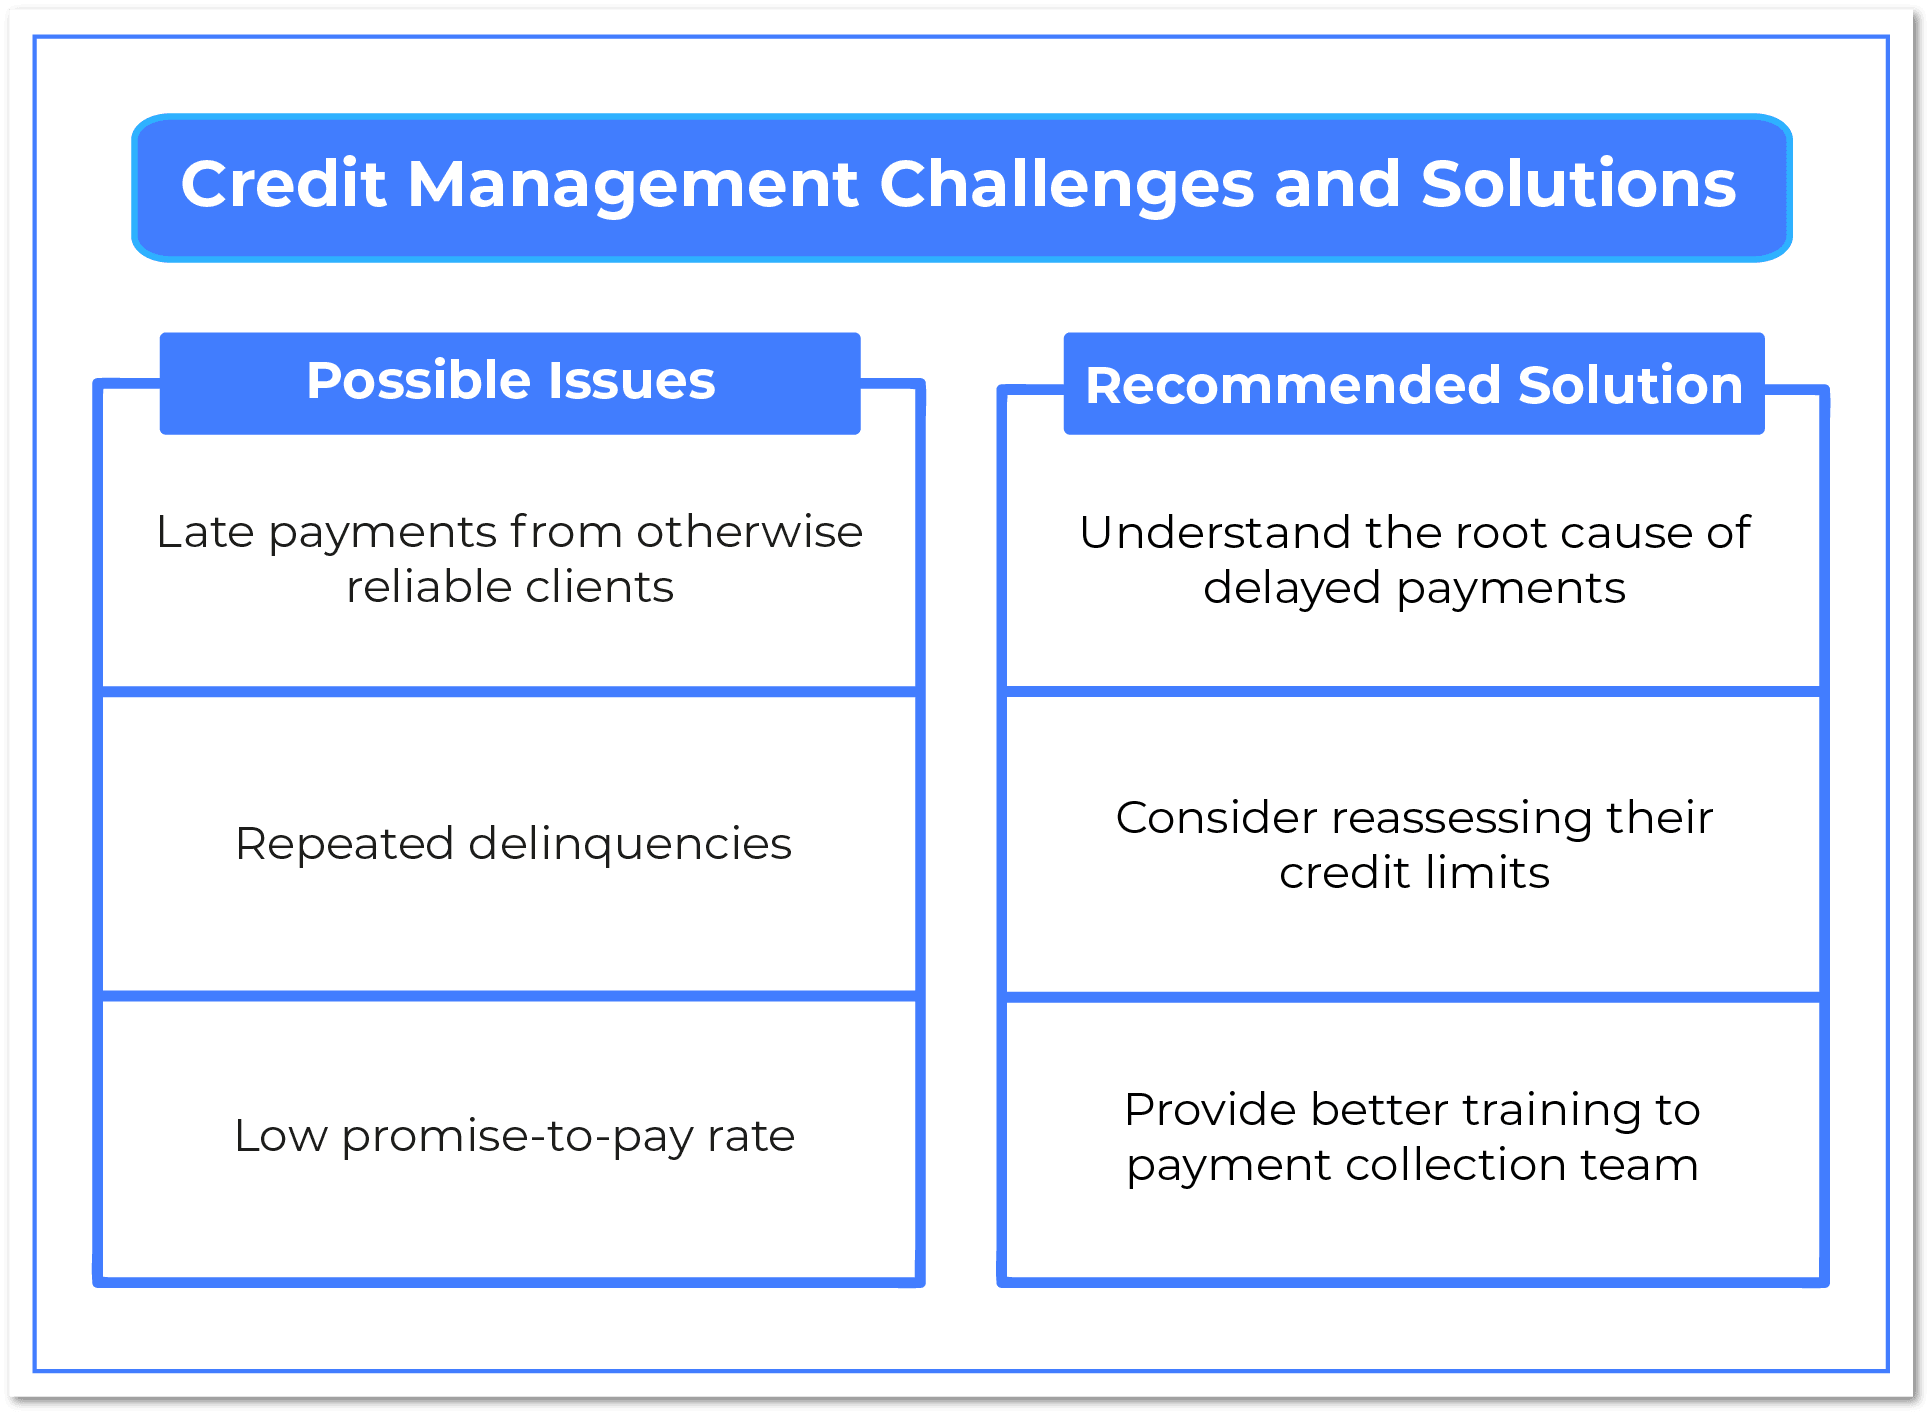 Credit Management Challenges and Solutions